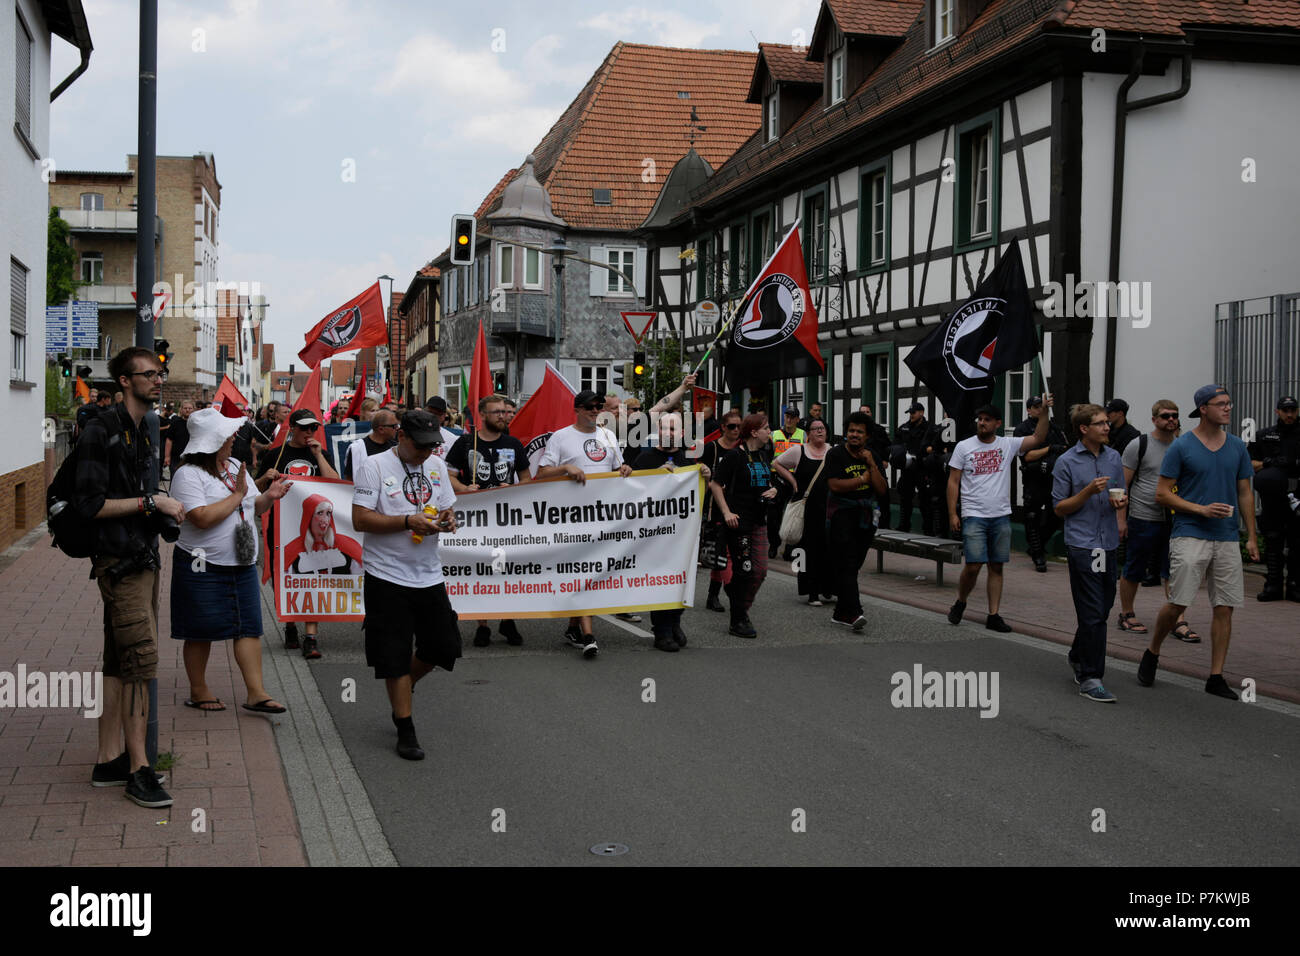 Kandel, Germany. 7th July 2018. Counter protesters march through Kandel. Around 200 people from right-wing organisations protested for the 10. time in the city of Kandel in Palatinate against refugees, foreigners and the German government. They called for more security of Germans and women from the alleged increased violence by refugees. Credit: Michael Debets/Alamy Live News Stock Photo